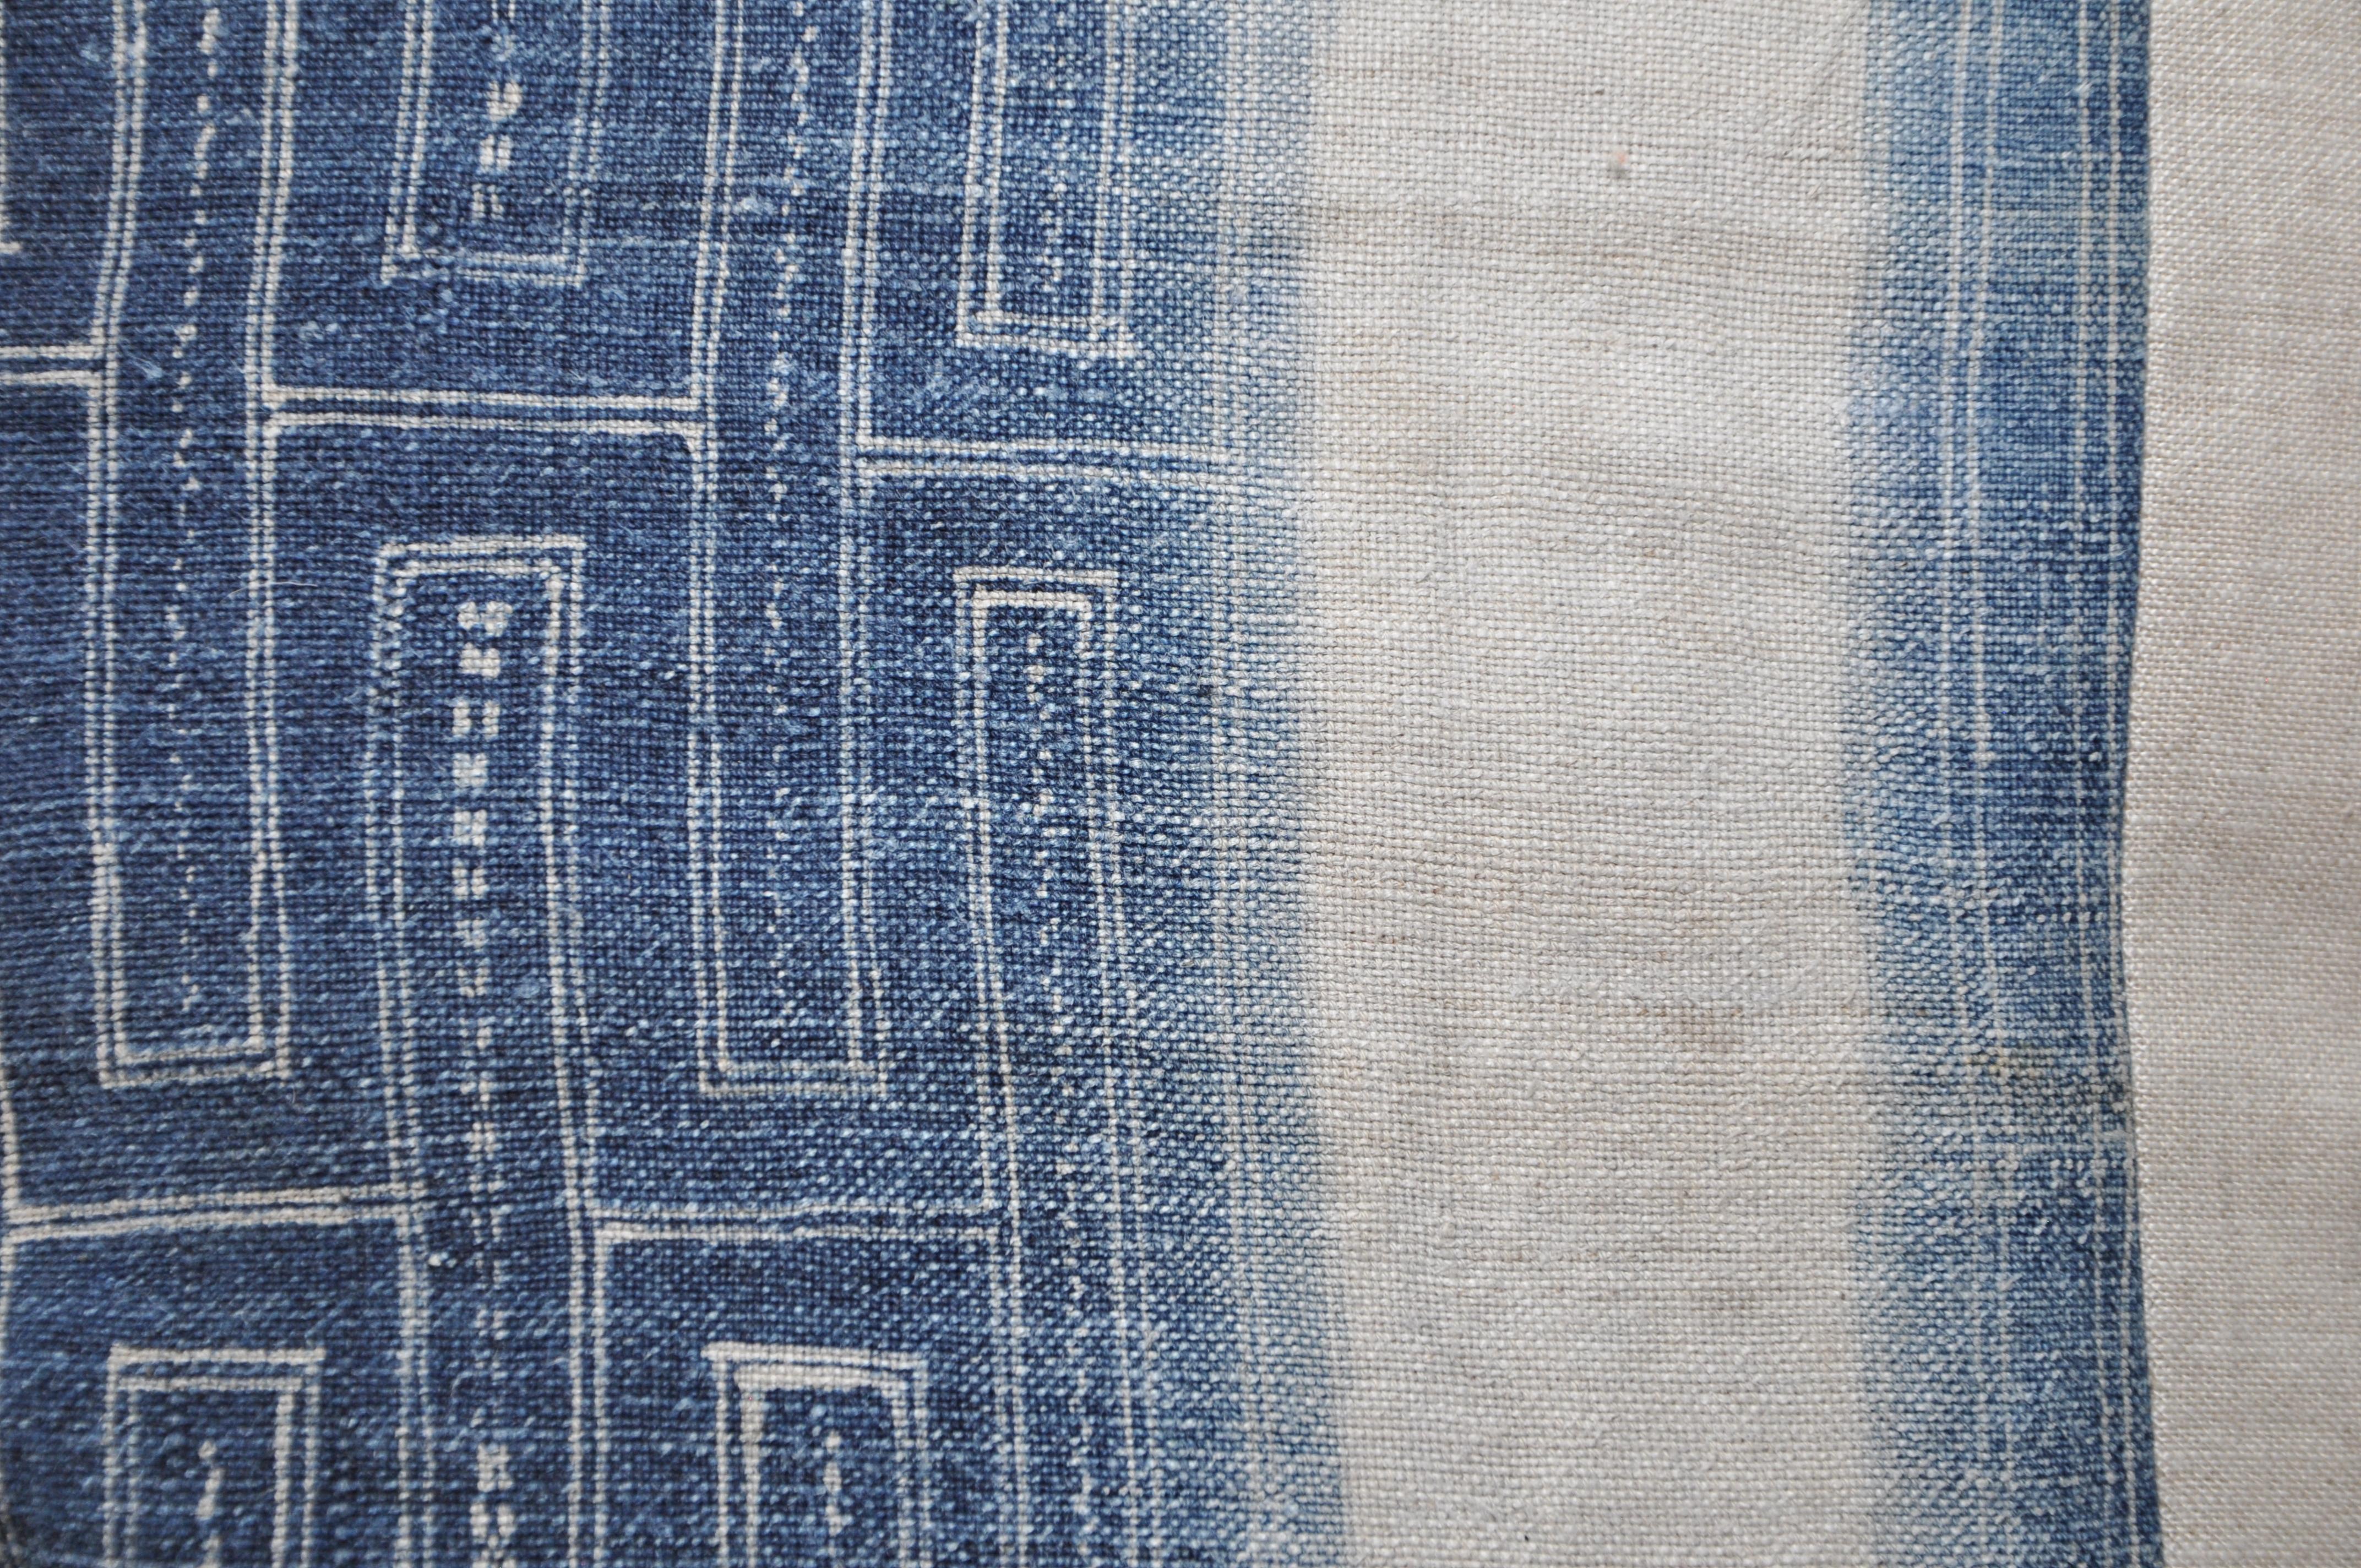 Hand-Crafted Vintage Hmong Tribe Fabric in Indigo Blue with Natural Pure Irish Linen Reverse For Sale